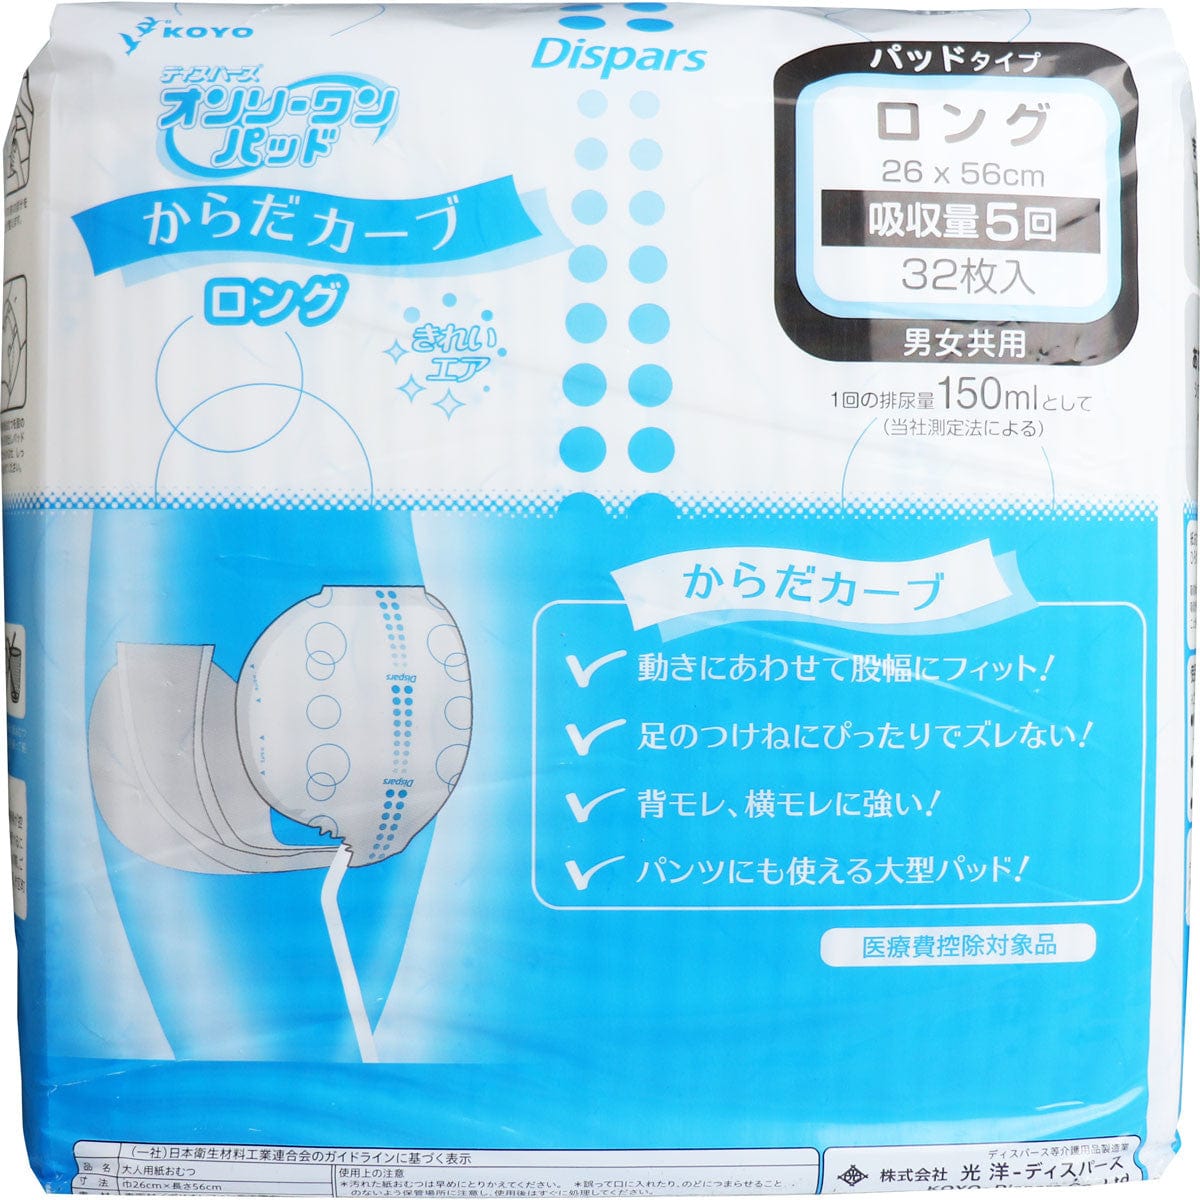 Koyo - Dispars Only One Pad Body Curve Urine Leakage Unisex Adult Diapers - Long Adult Diapers 4961392320786 Durio.sg